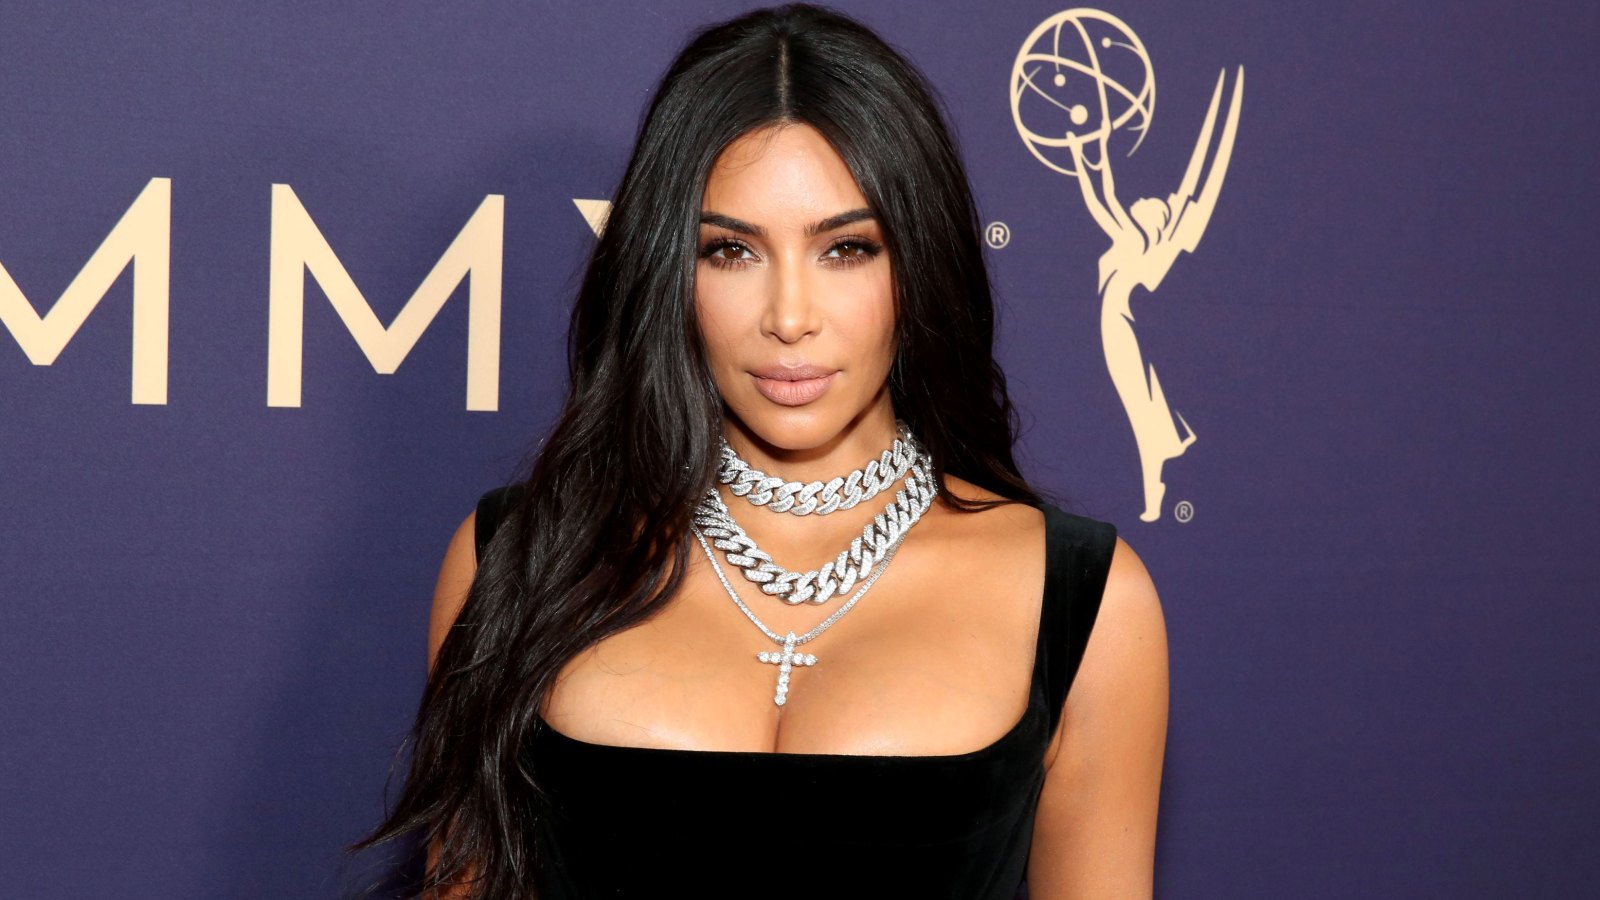 Kim Kardashian Says She’s Gained 18 Pounds Since Last Year, Working on ‘Goal Weight’ for 40